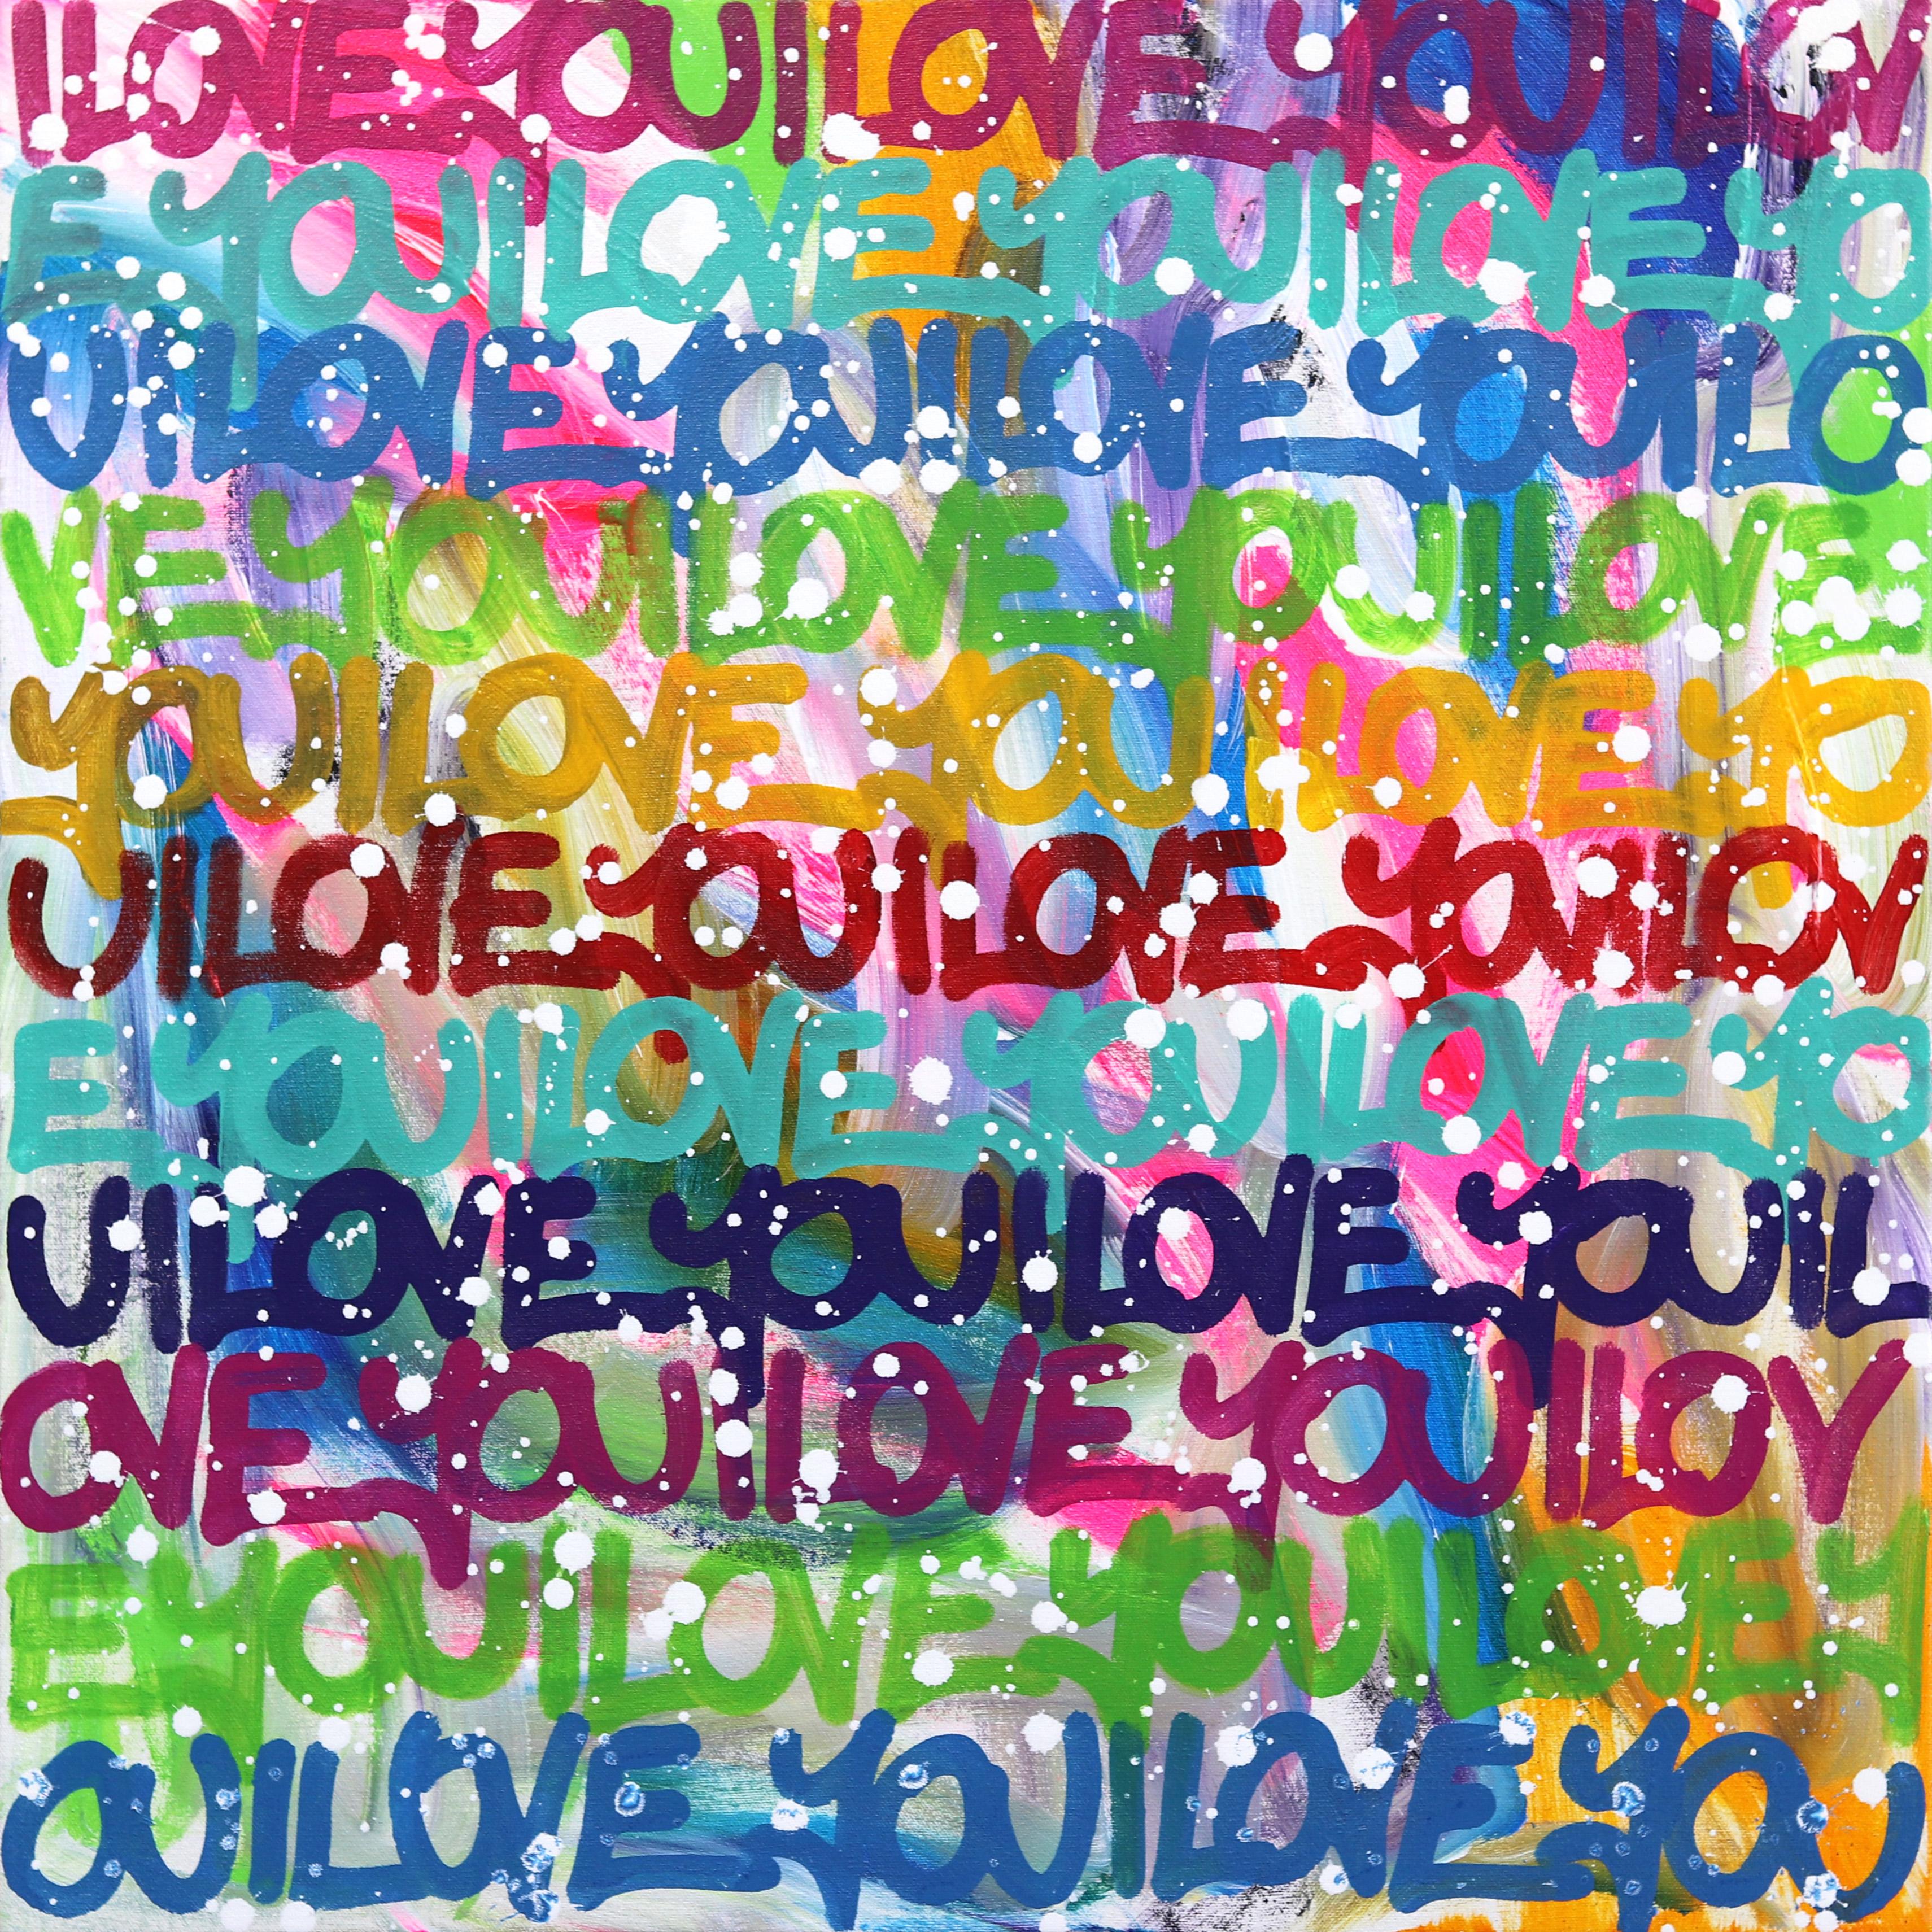 Abstract Painting Amber Goldhammer - Show Your Colorful Original Love Graffiti peinture sur toile